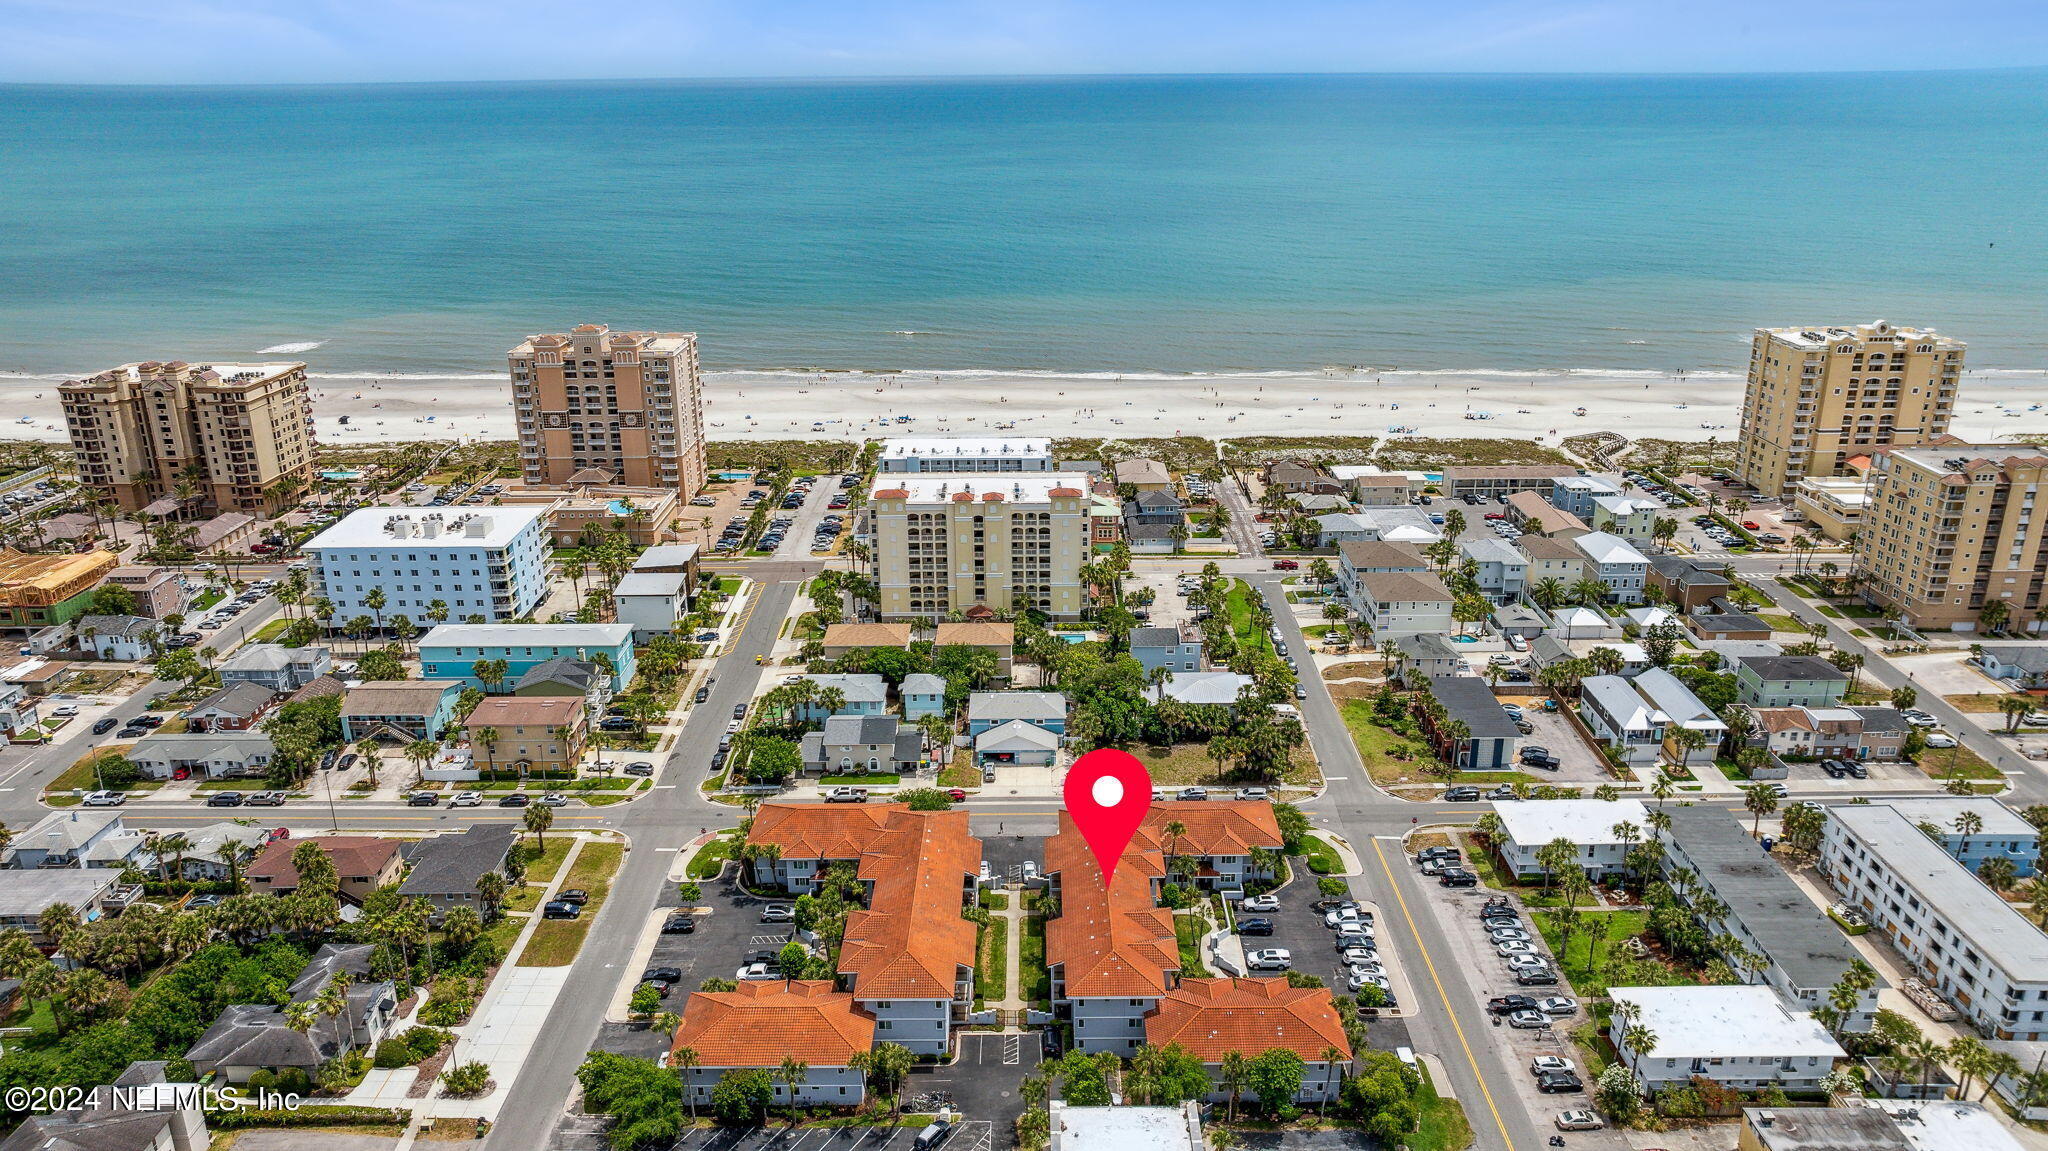 Jacksonville Beach, FL home for sale located at 201 10th Avenue N Unit 303N, Jacksonville Beach, FL 32250